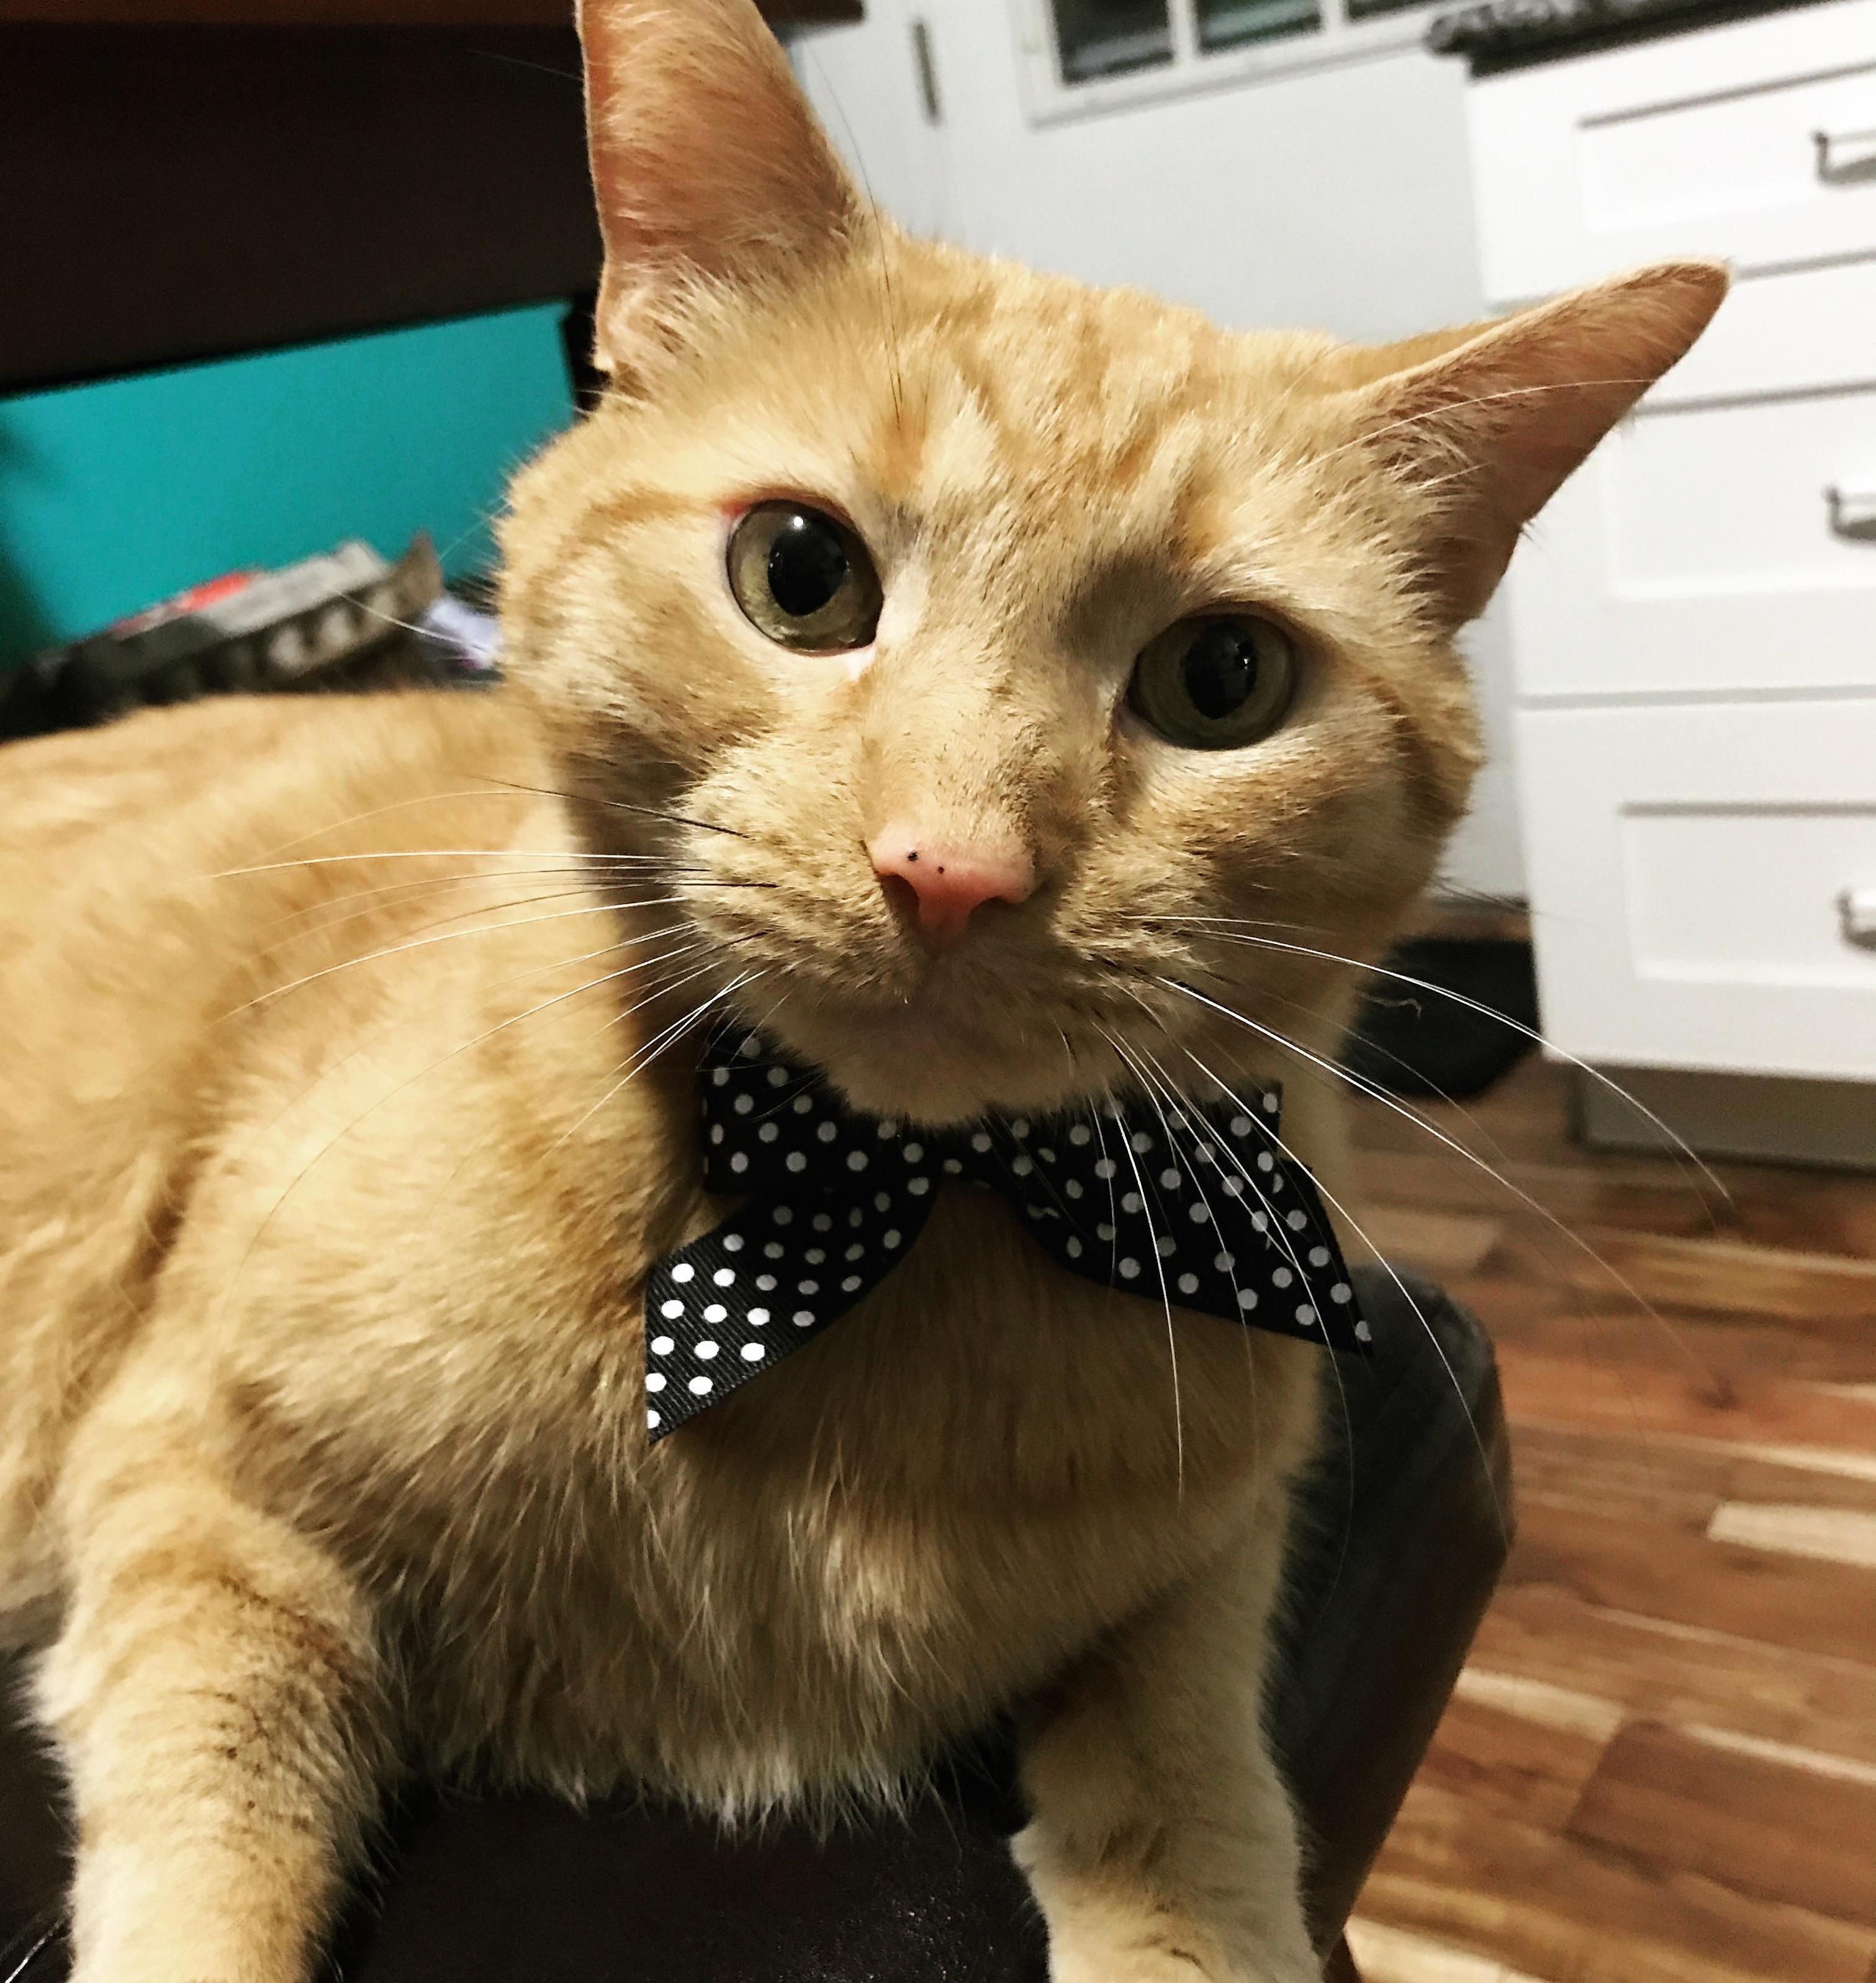 My handsome man looking fresh with his new bowtie